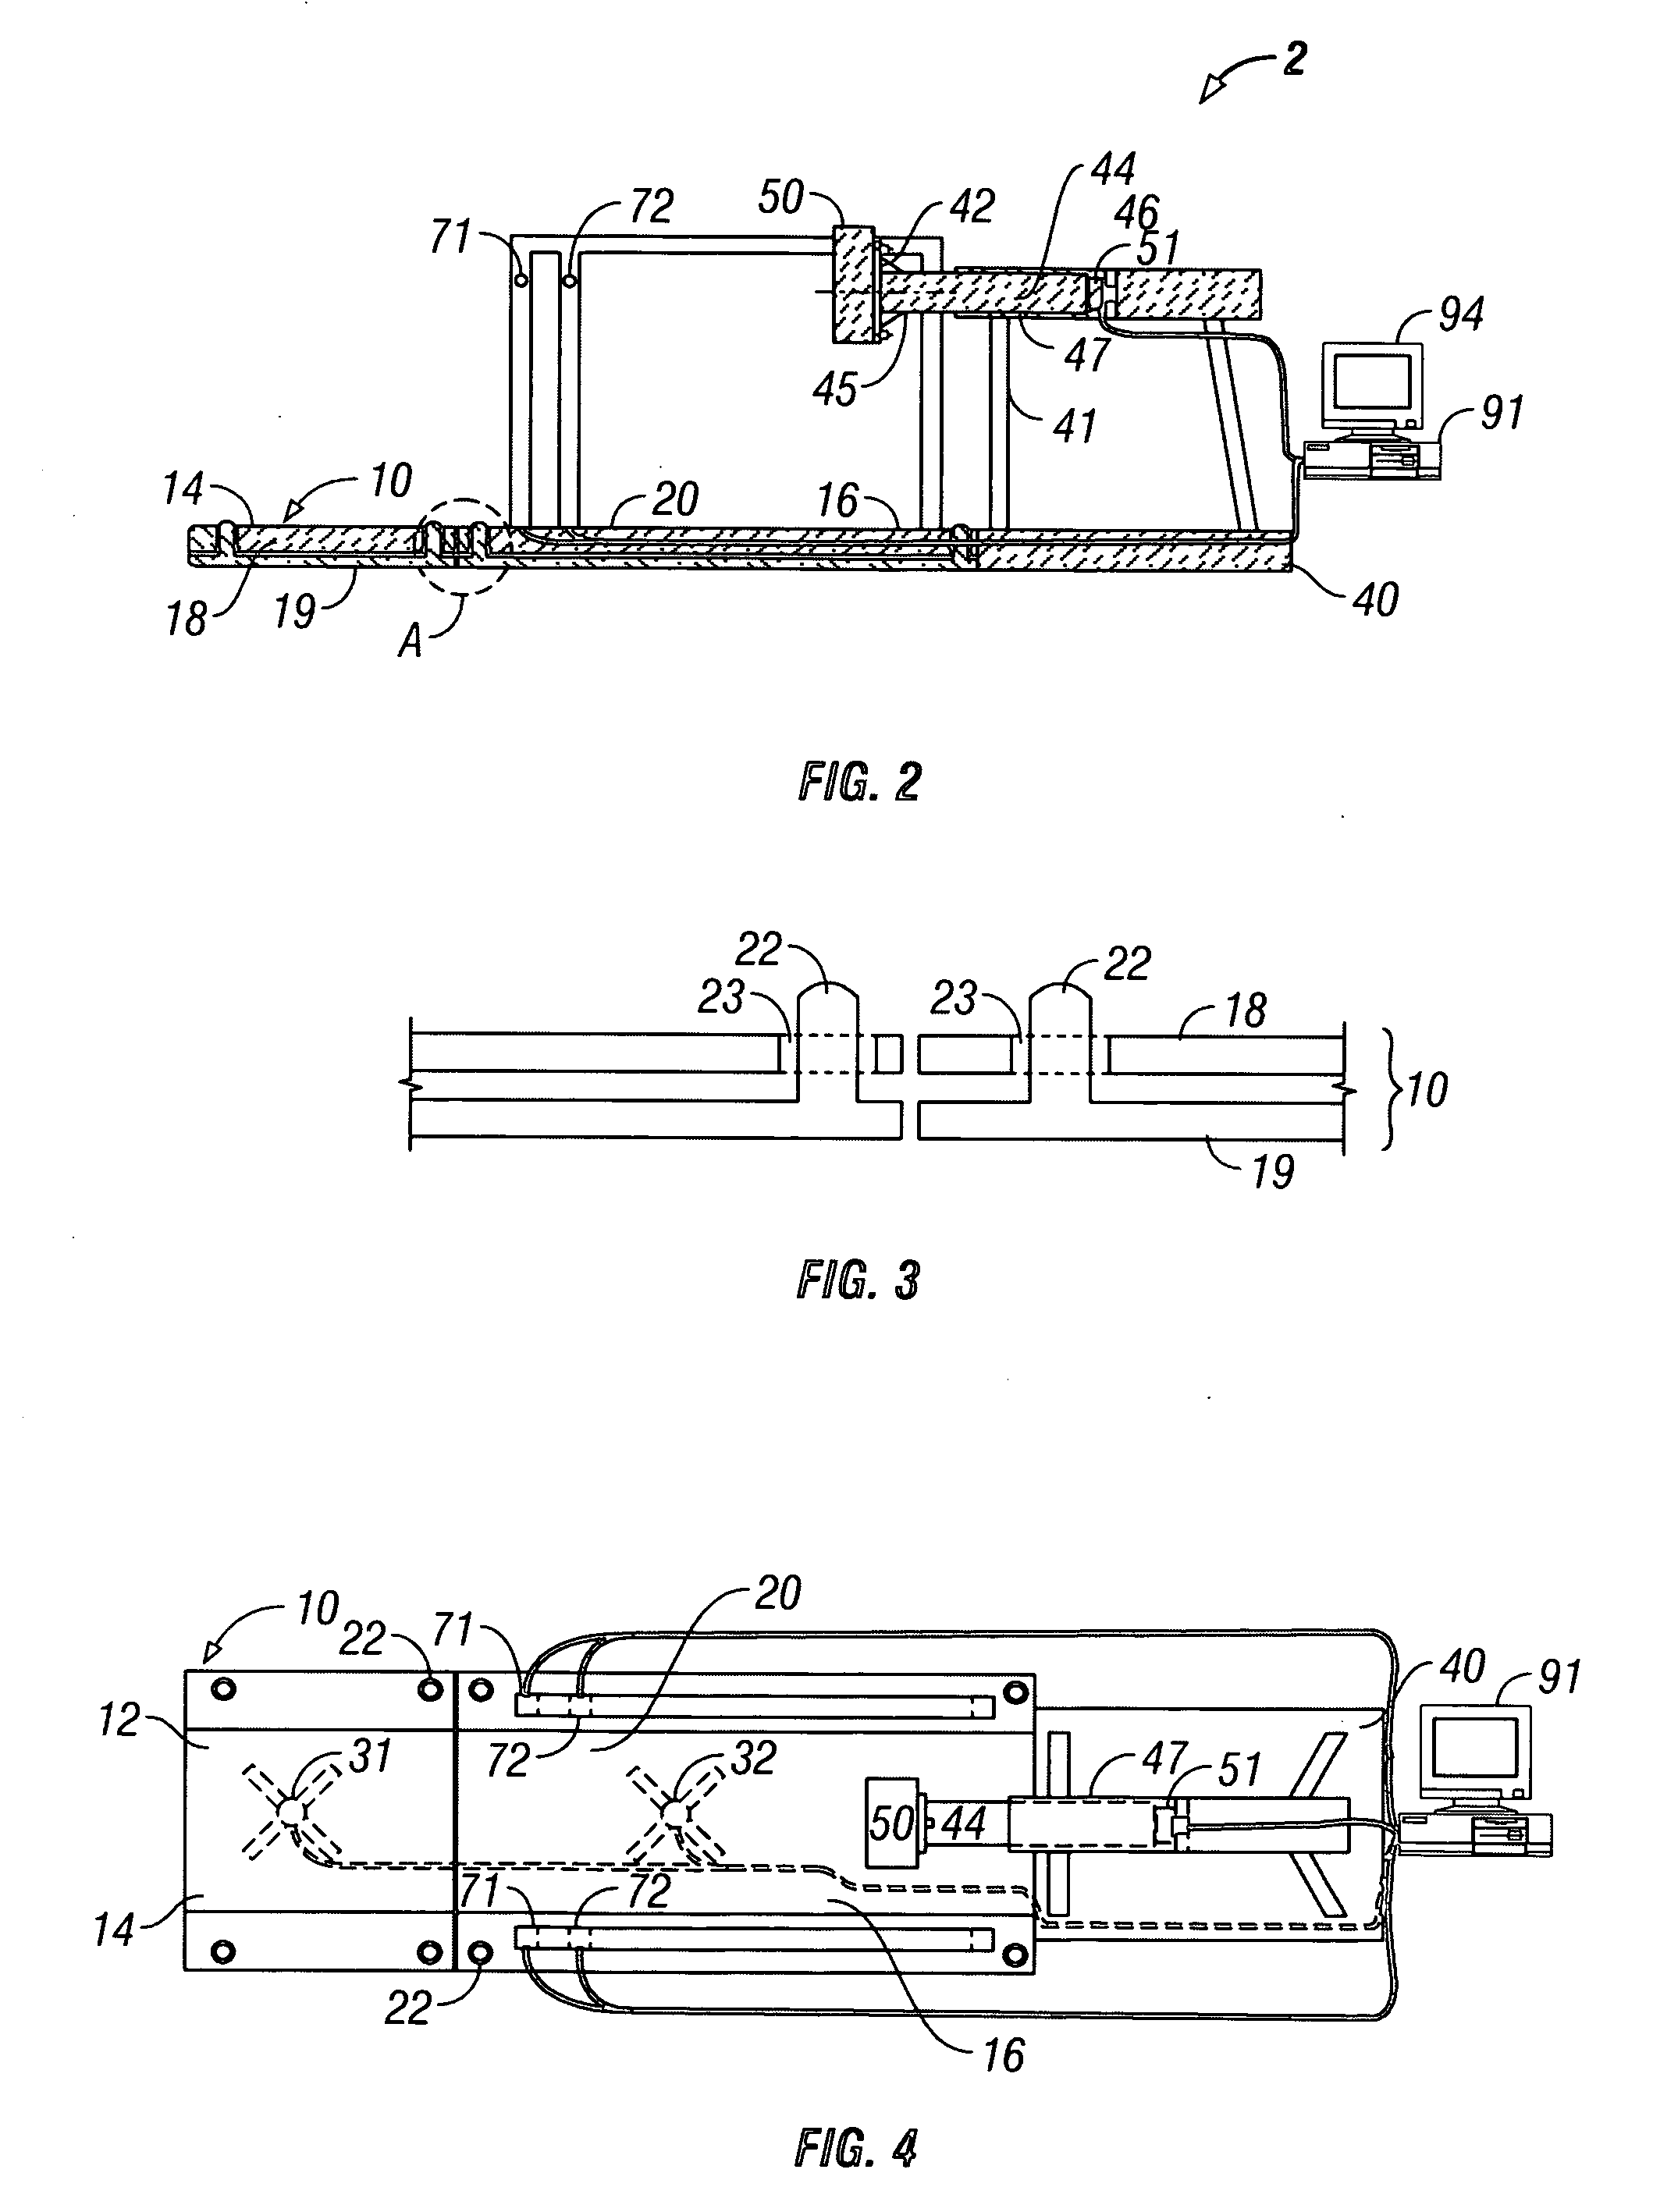 Athletic performance evaluation device